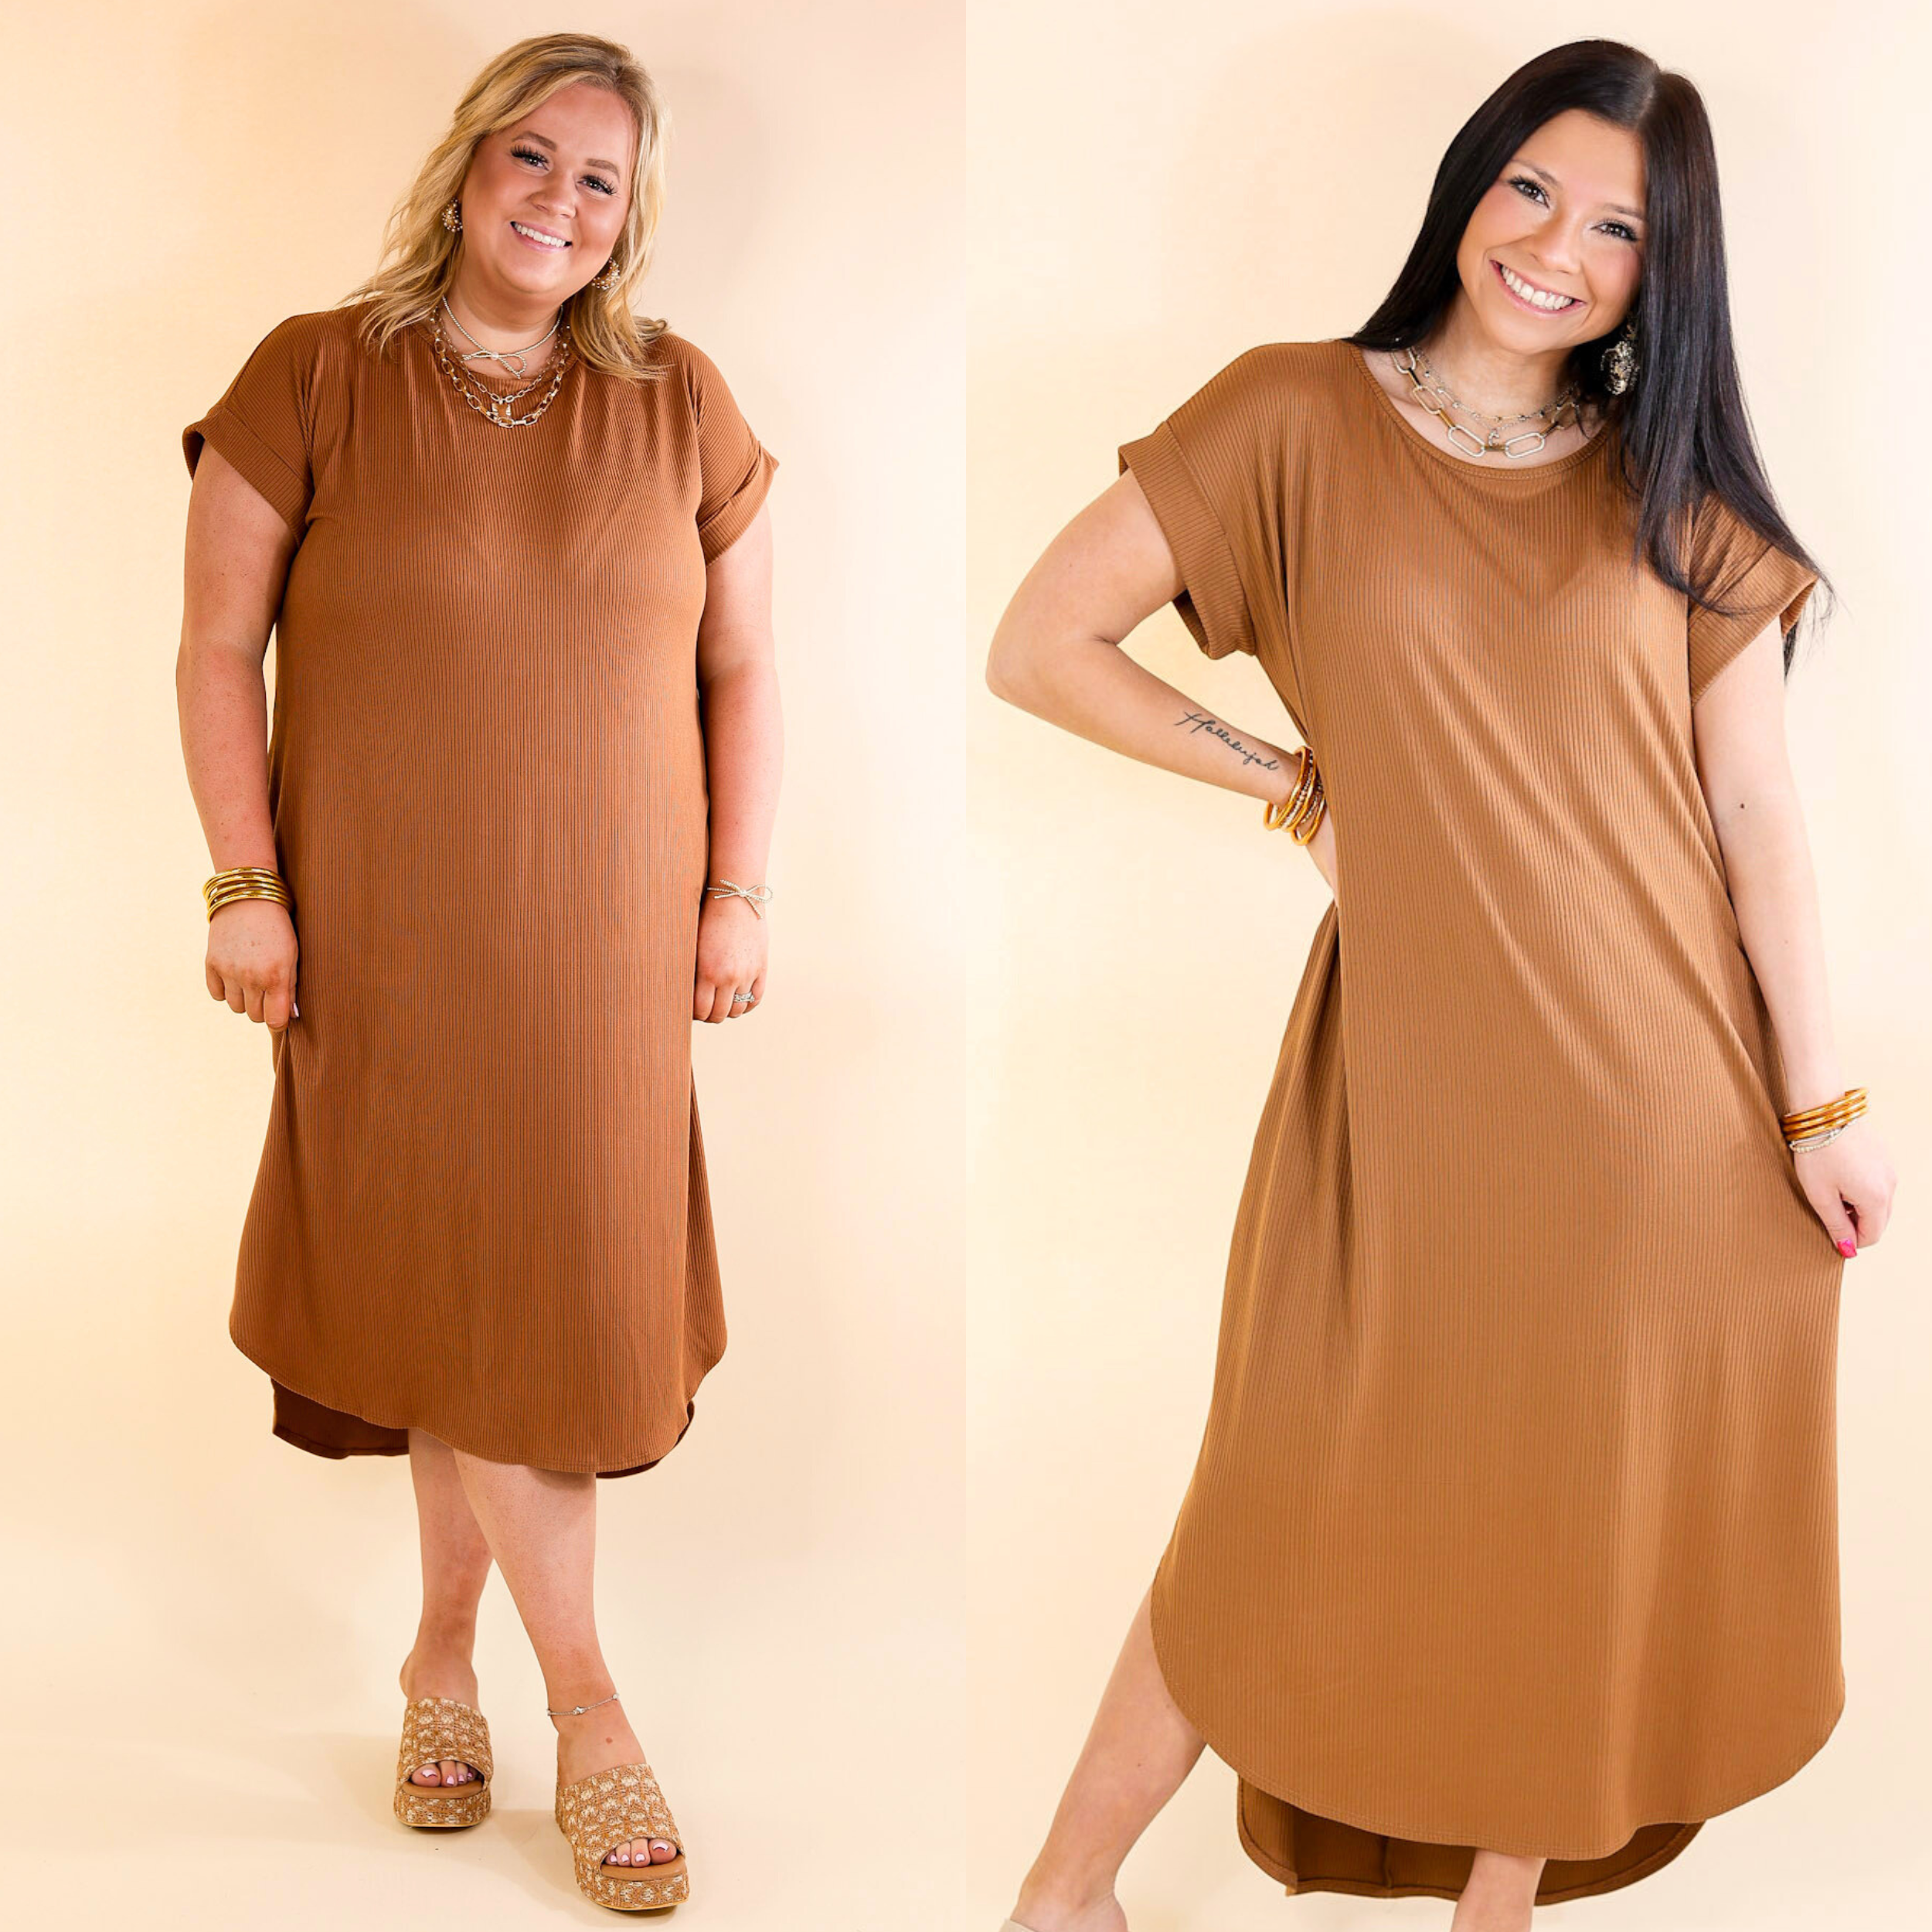 Last Chance Size Small, XL & 1XL | Chill Looks Short Sleeve Thin Ribbed Midi Dress in Caramel Brown